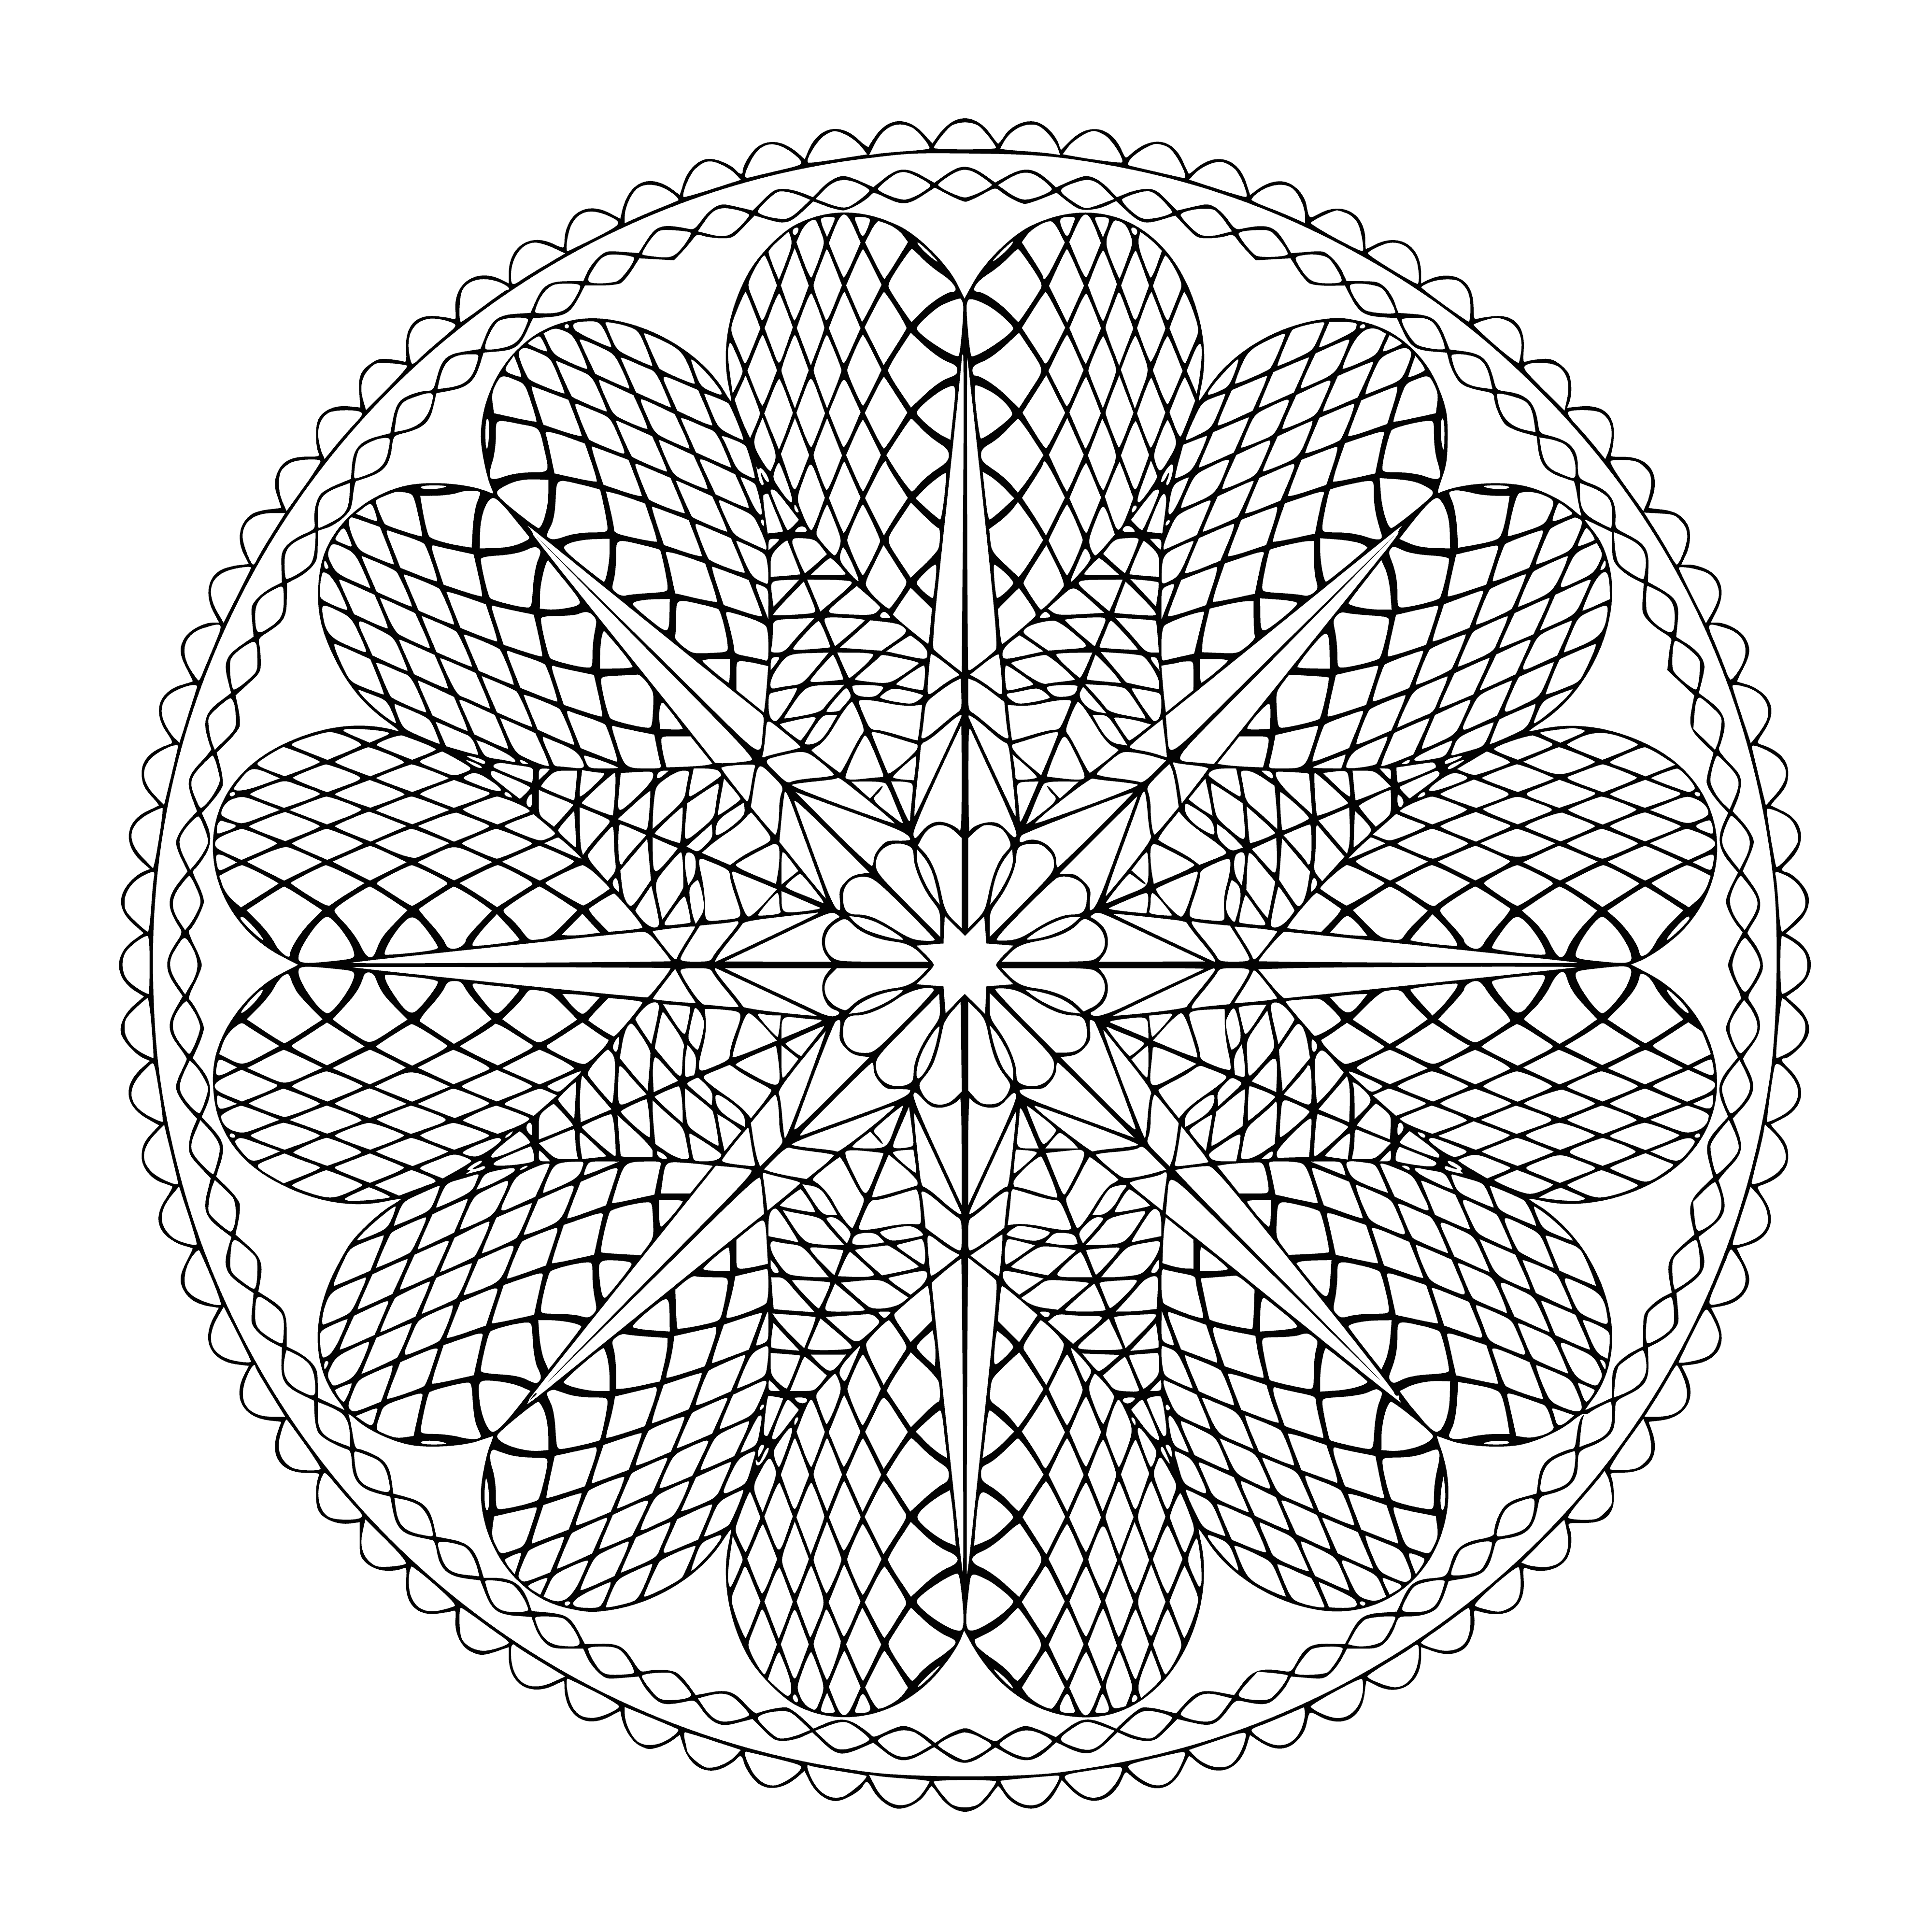 coloring page: Coloring page has intricate patterns, is symmetrical w/ circle in center, swirls/shapes outline in black/not, various symbols.